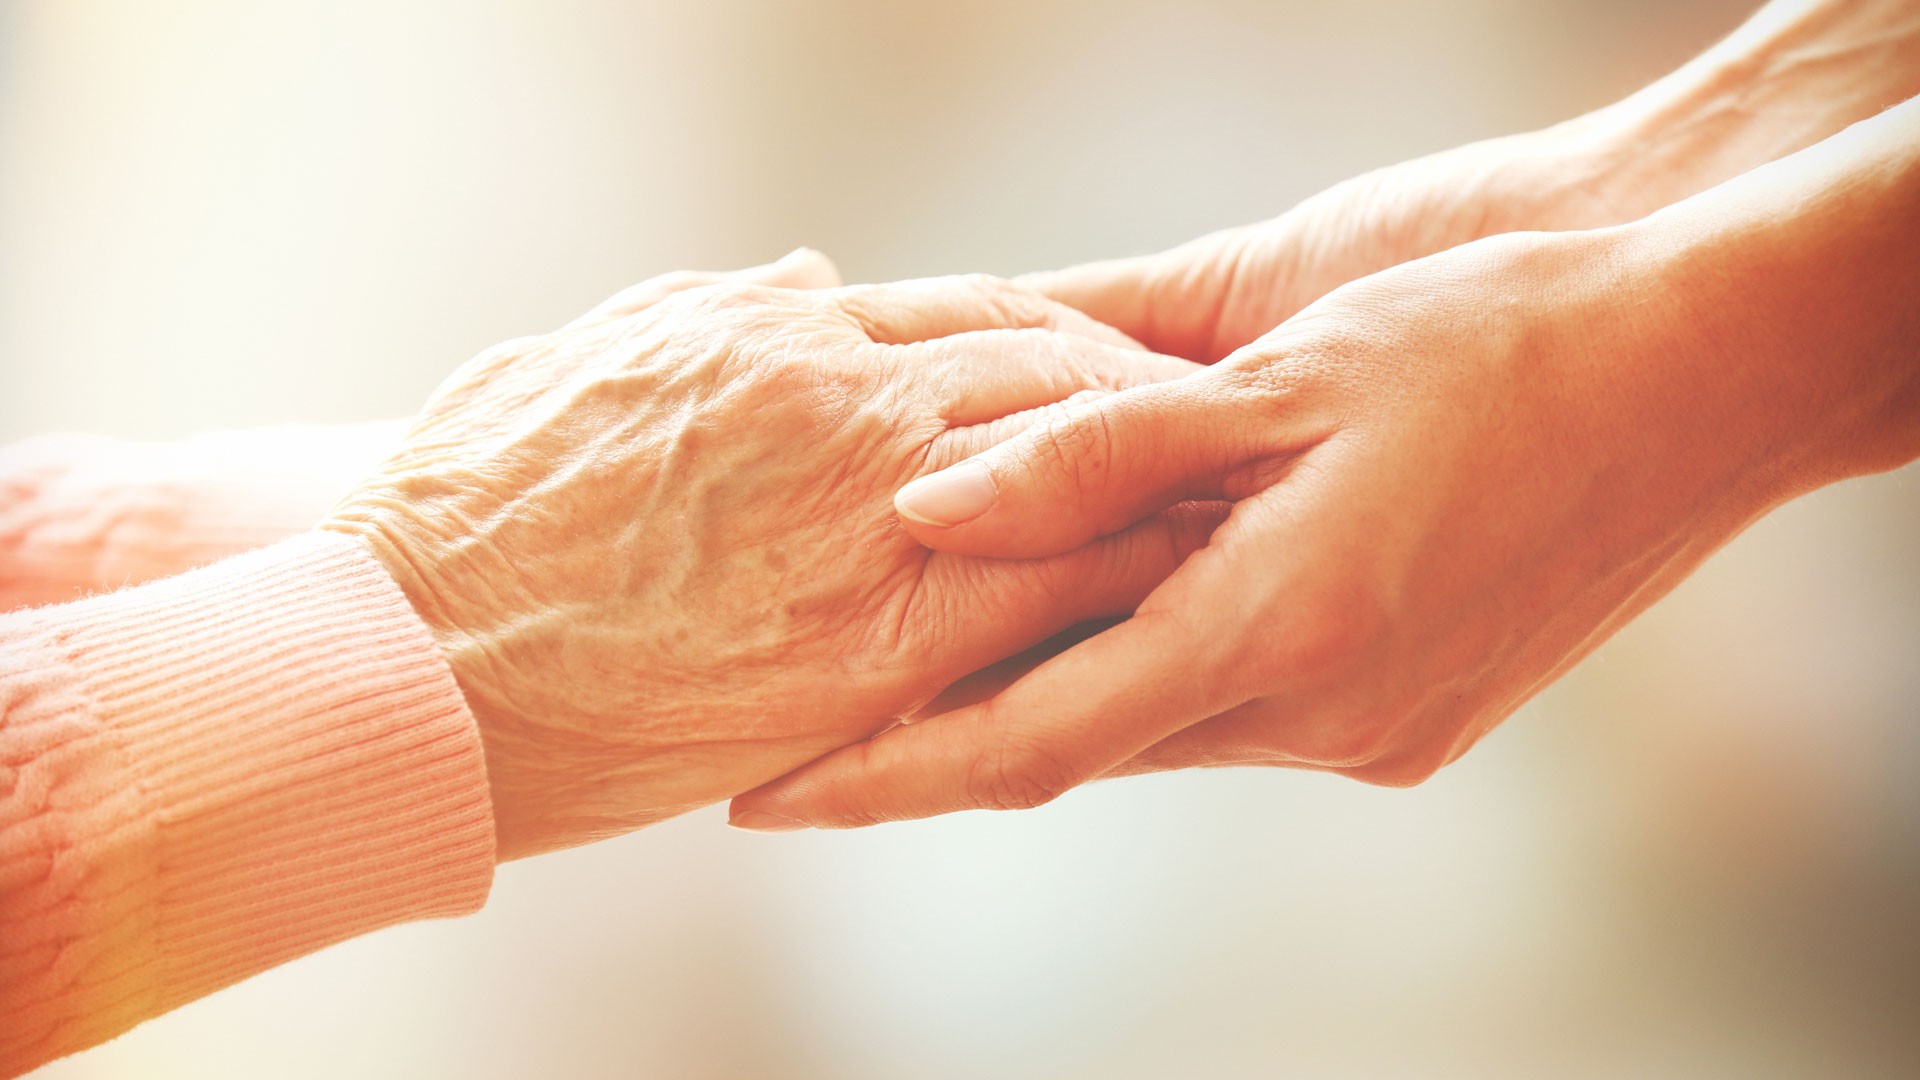 Homespark Services Caregivers For The Elderly In Brazos Valley